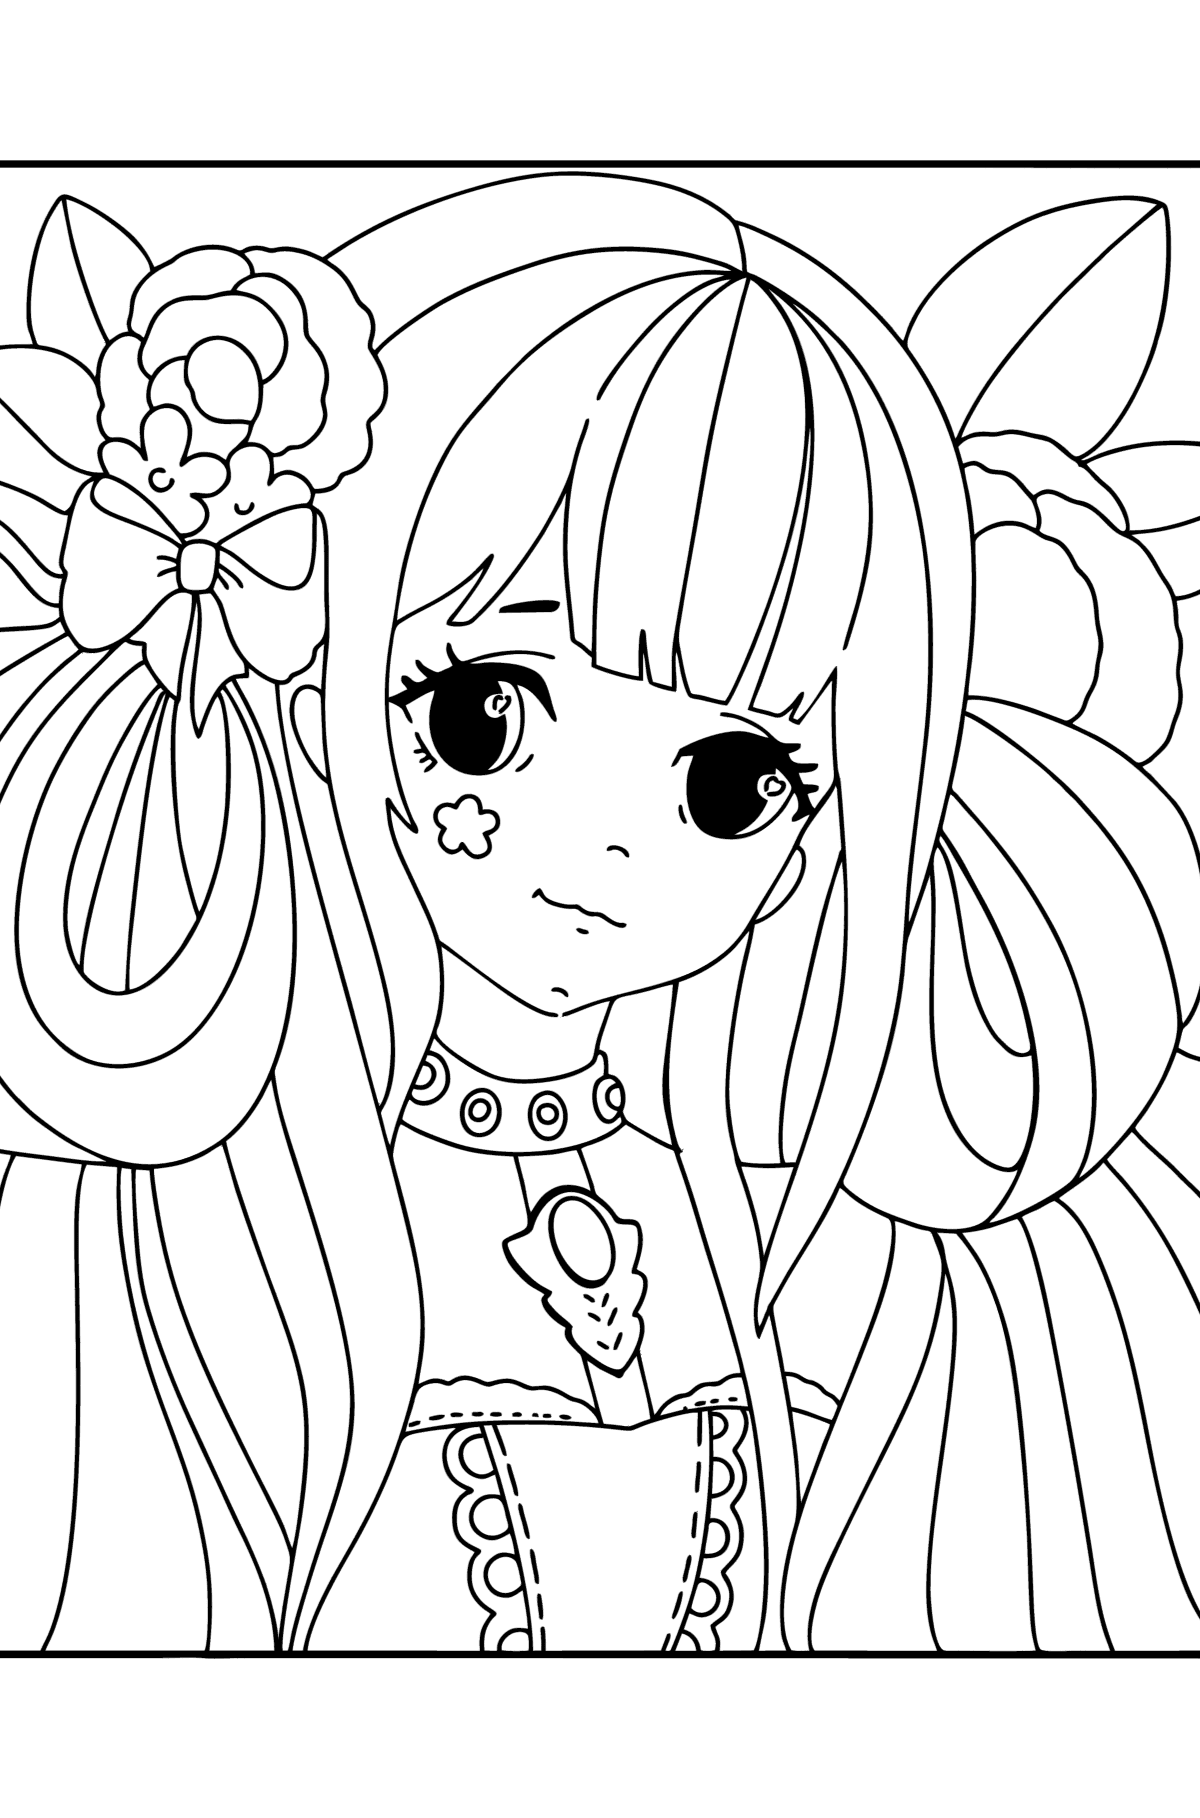 Girl face coloring page - Coloring Pages for Kids